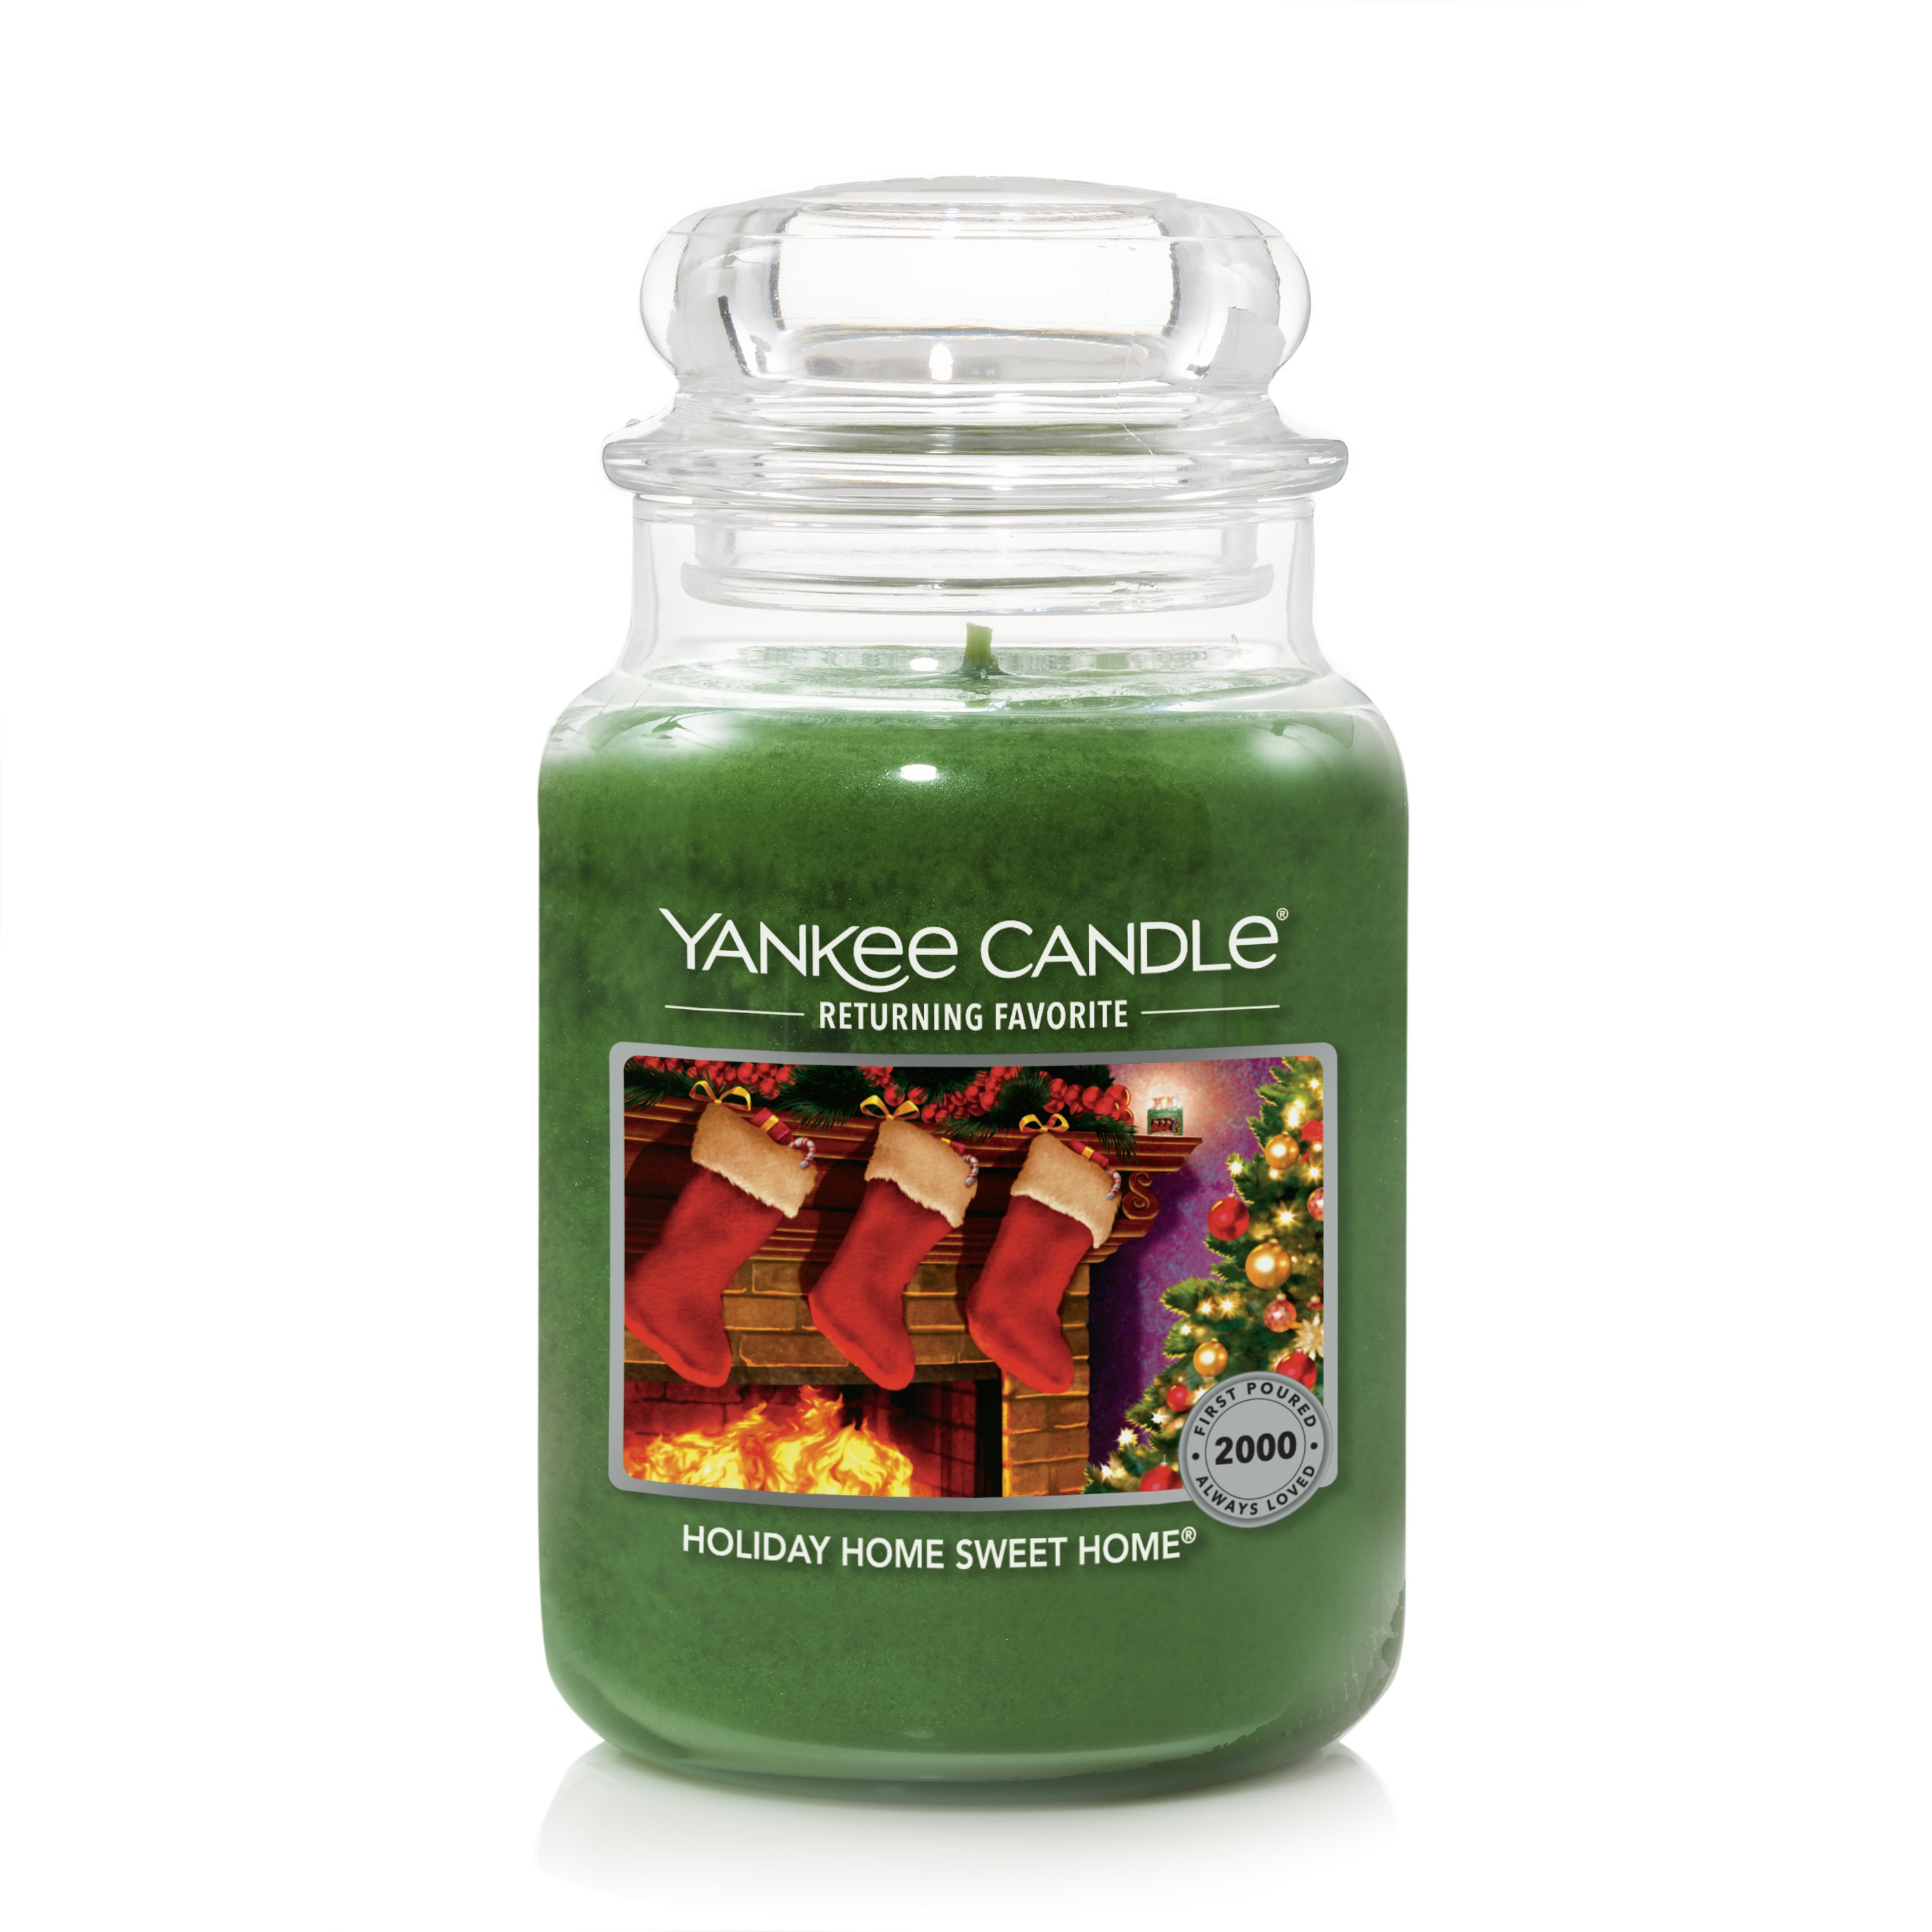 Yankee Candle Home Sweet Home - Original Large Jar Scented Candle 